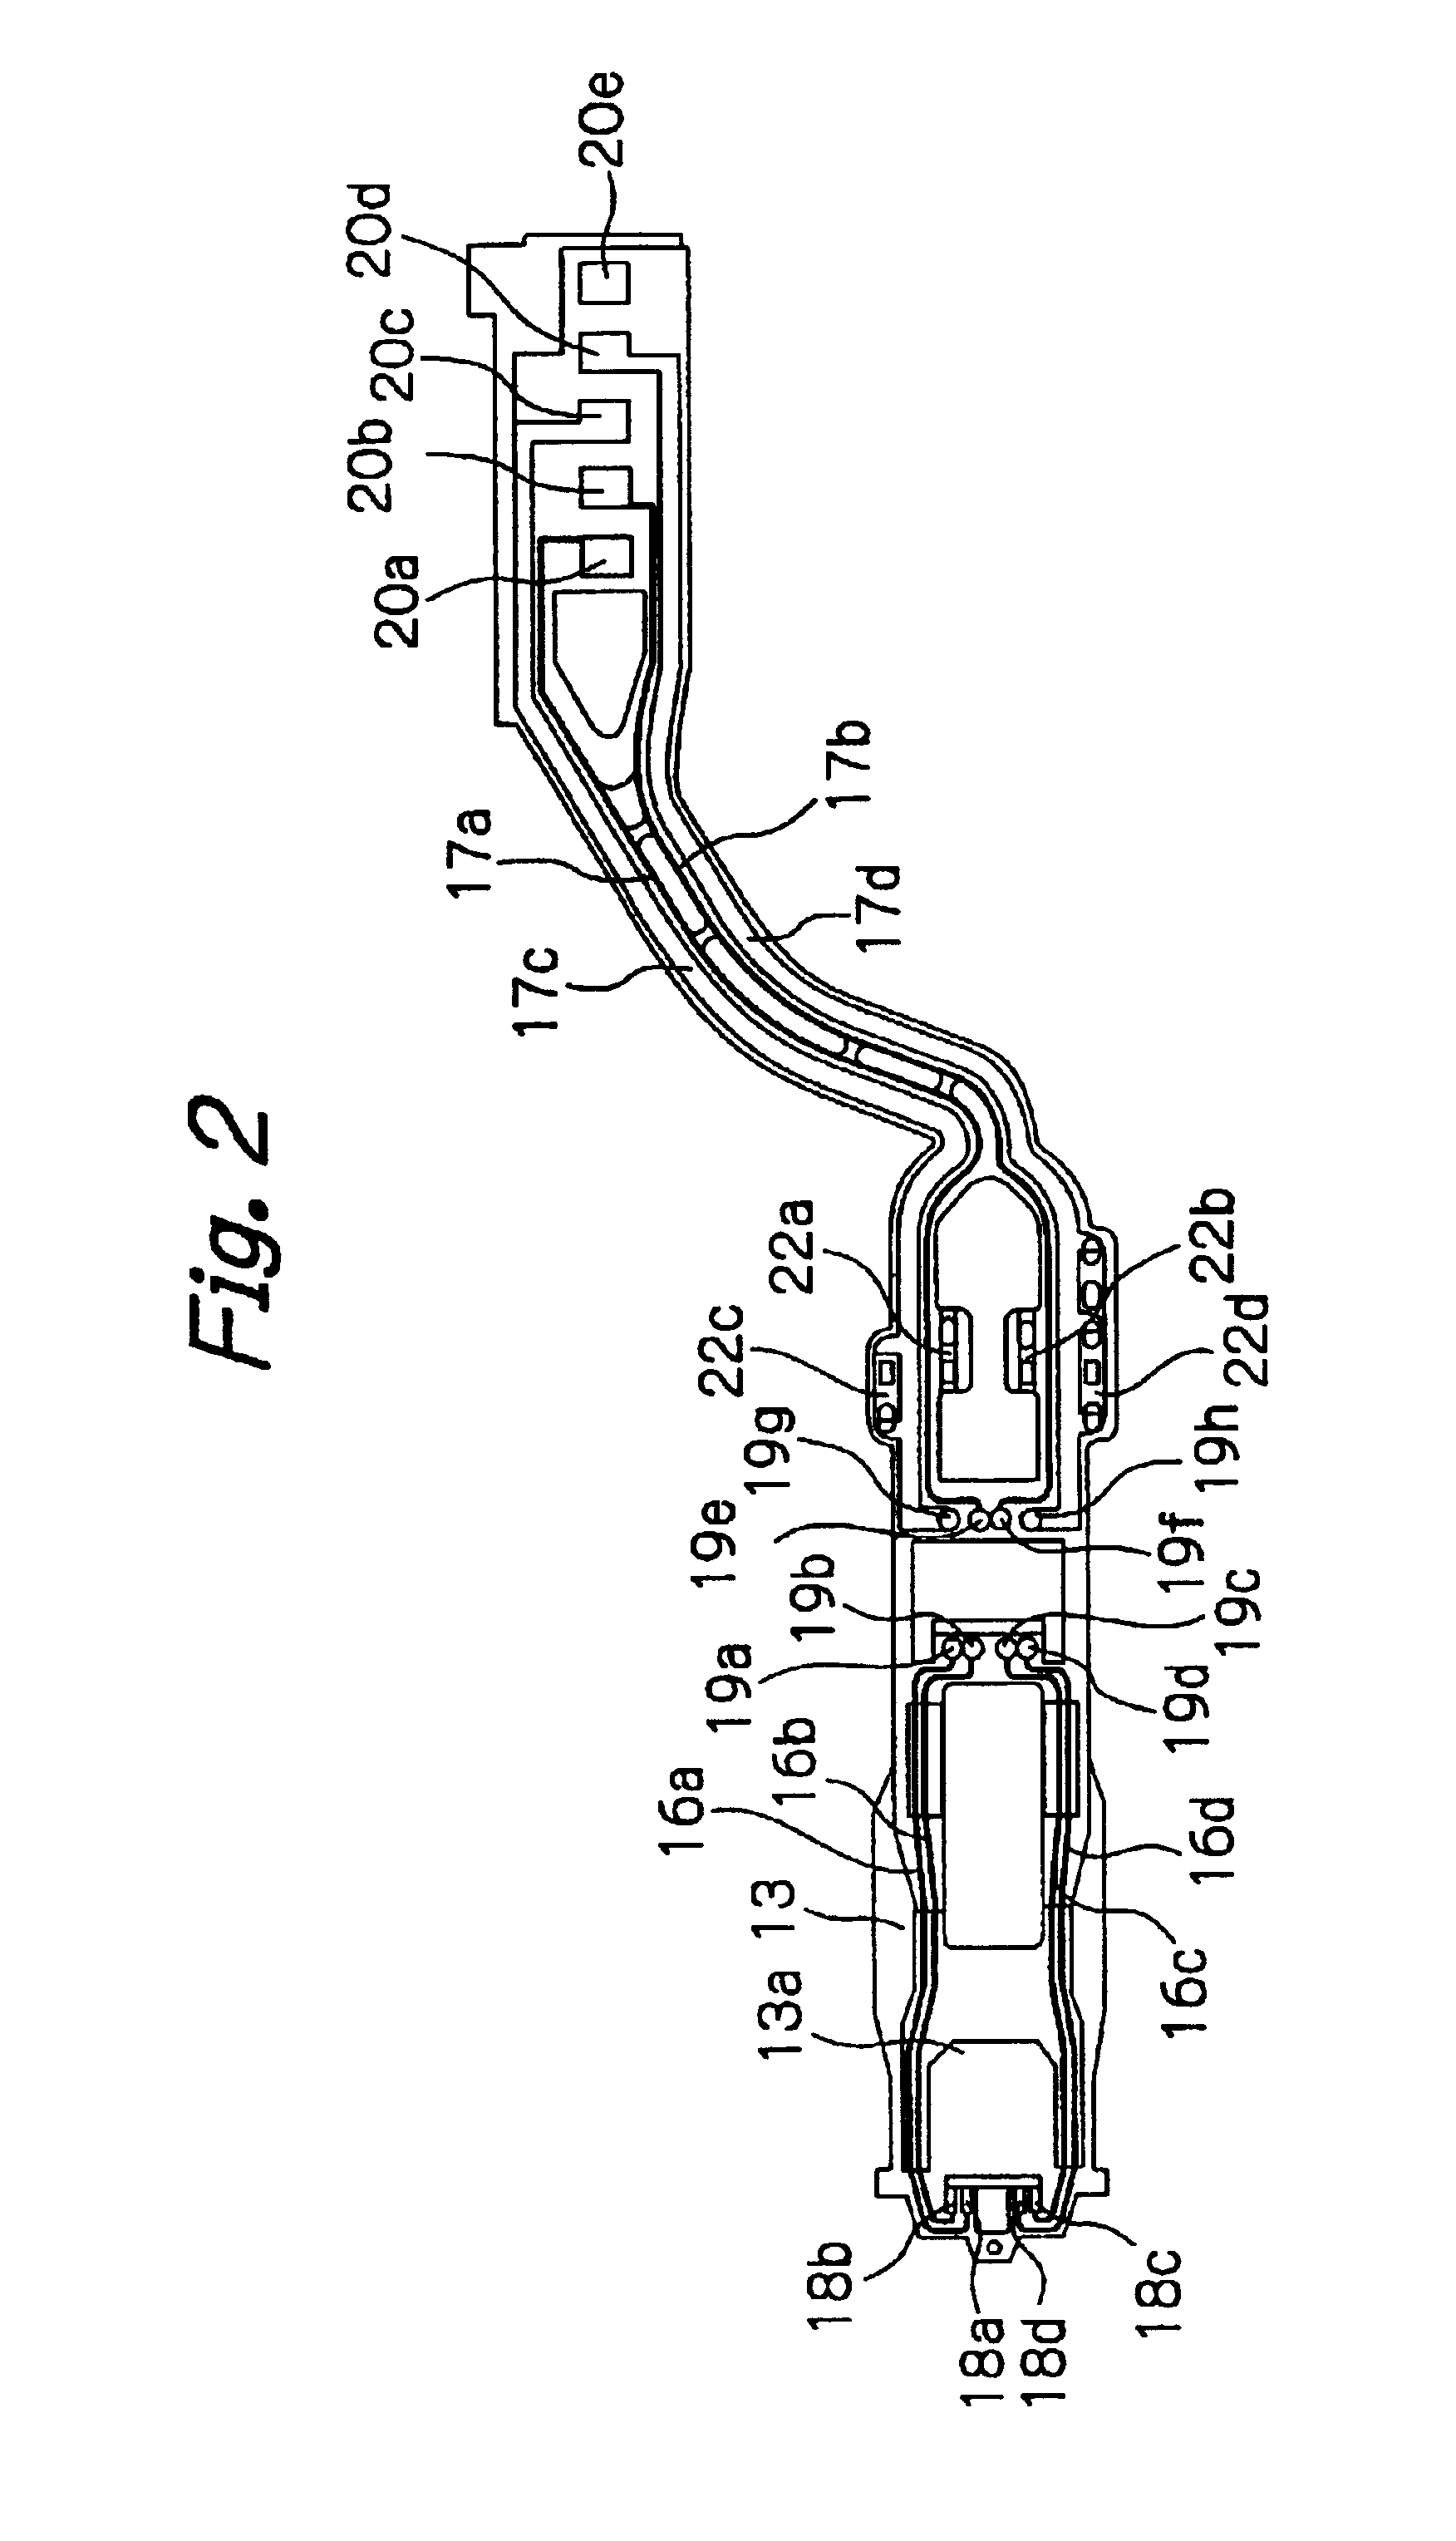 Lead conductor member for thin-film magnetic head and head gimbal assembly, using temporarily connected test connection pads